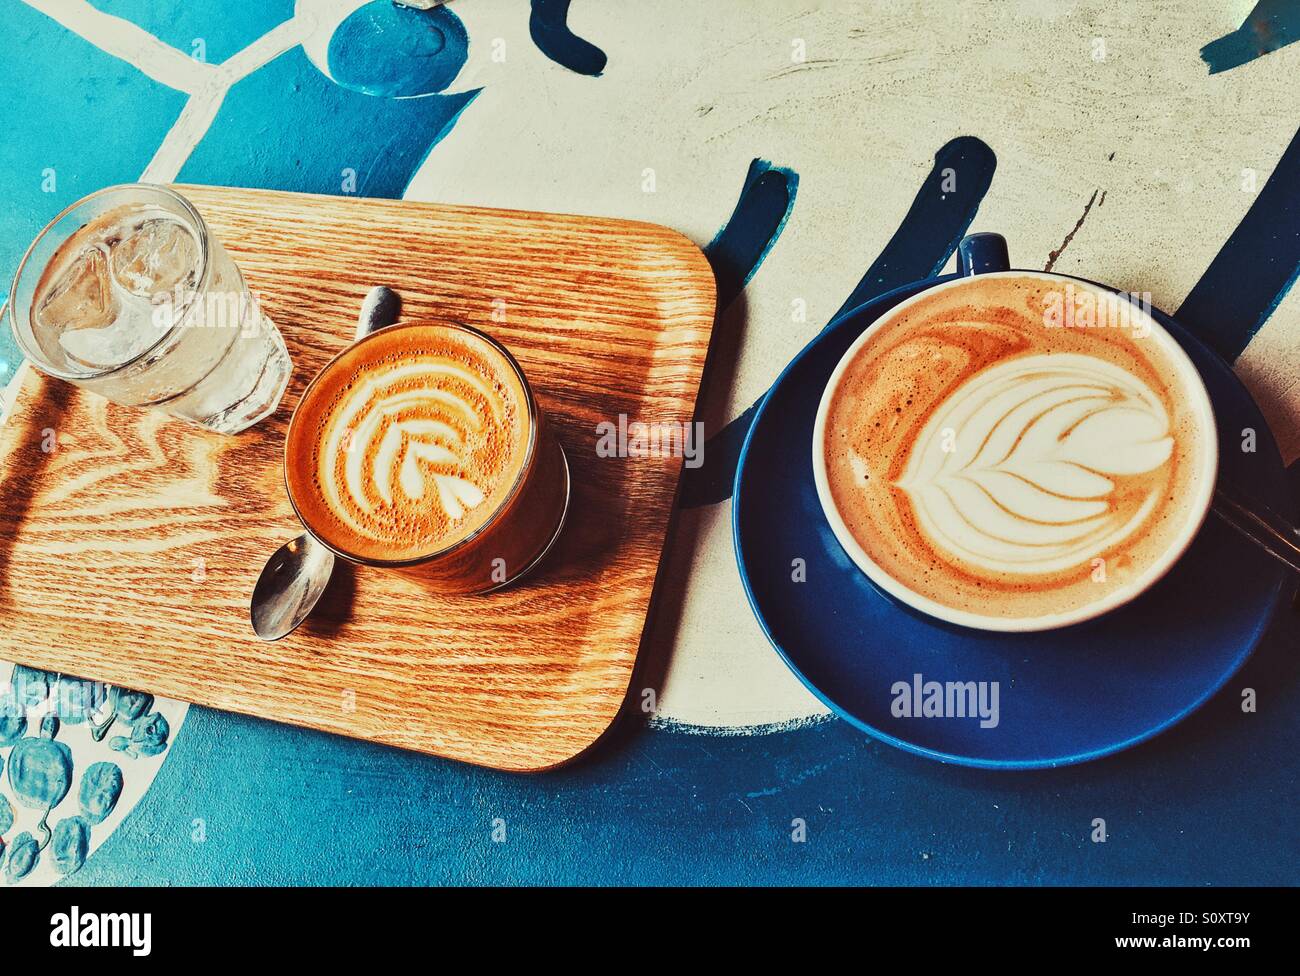 View from above of a table with two coffees, glass of water and wooden tray Stock Photo